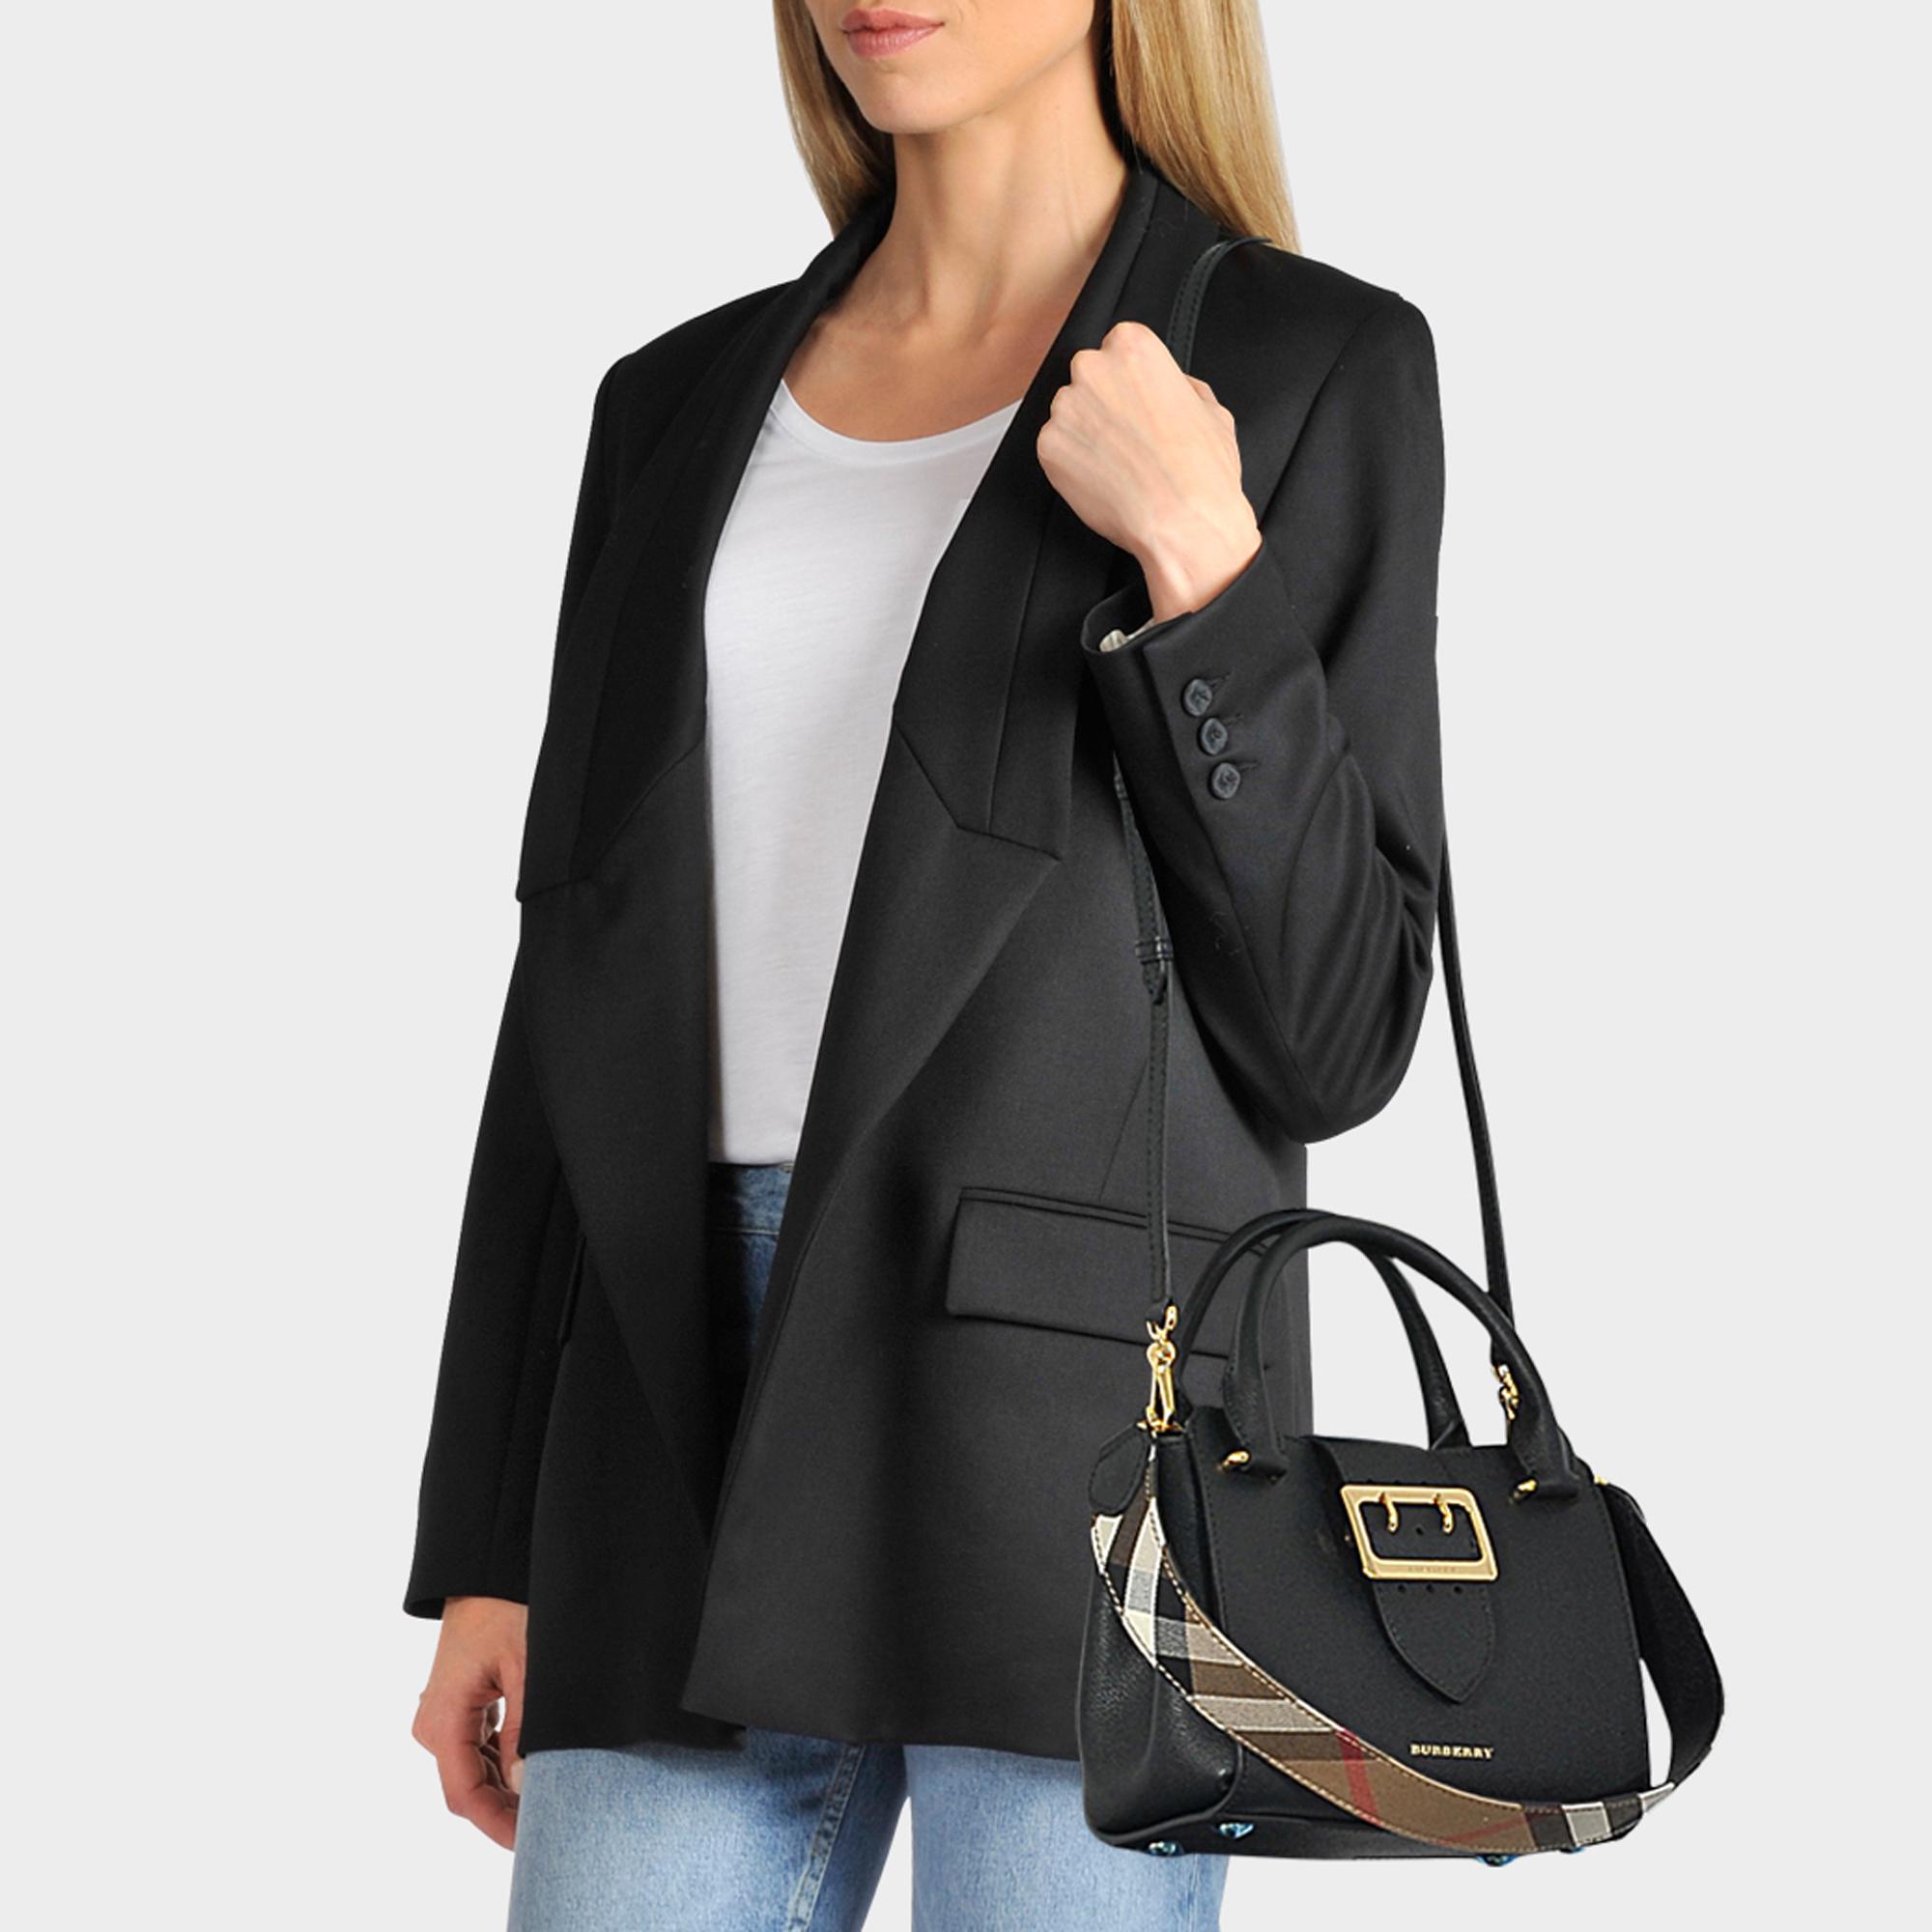 Burberry Small Buckle Tote Bag In Black Grained Calfskin | Lyst